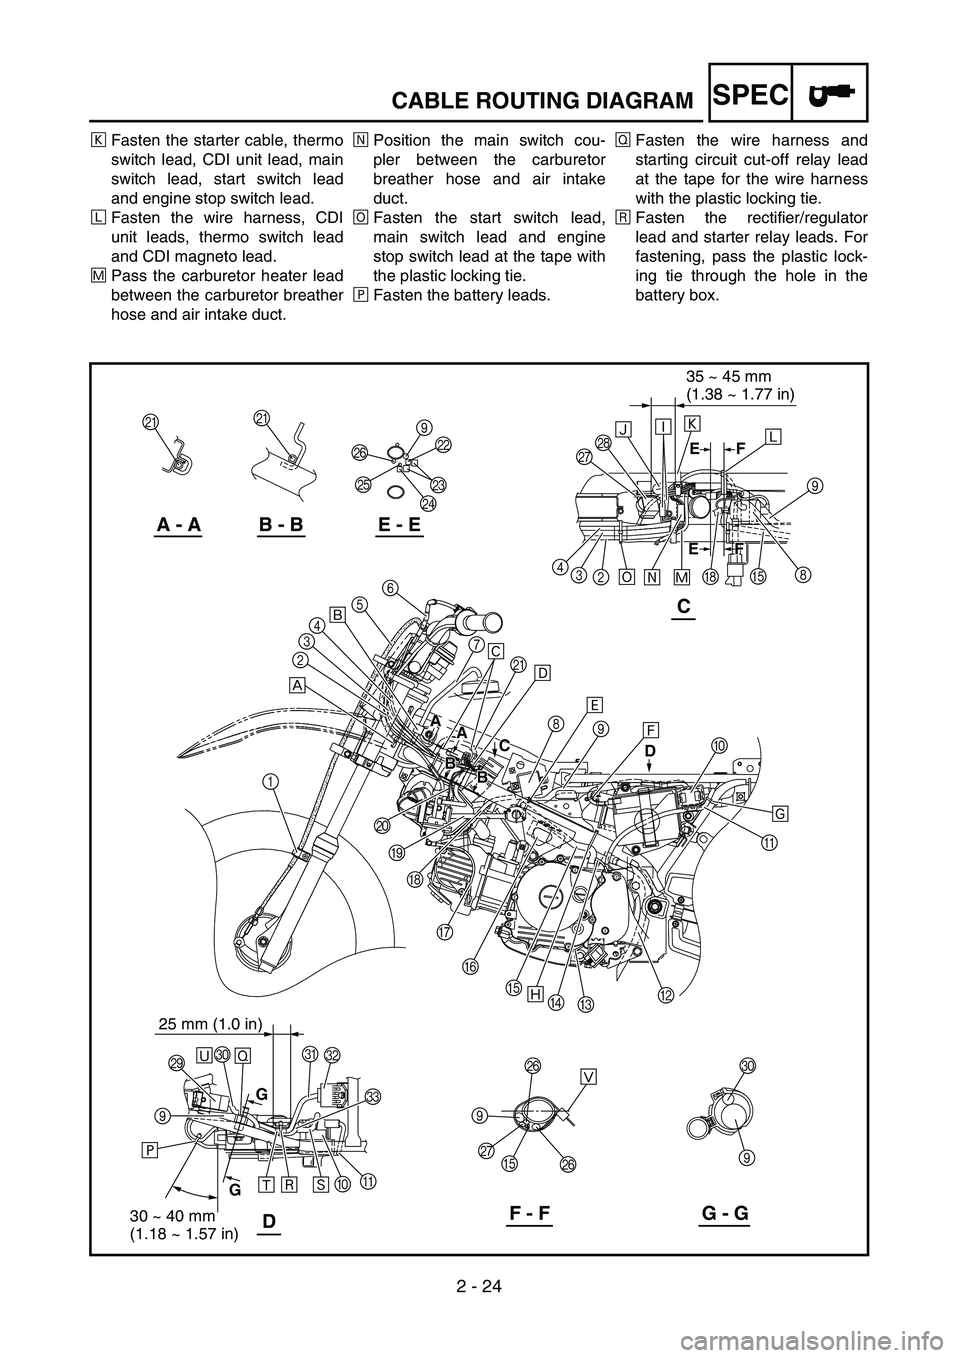 YAMAHA TTR90 2005  Owners Manual 2 - 24
SPEC
Fasten the starter cable, thermo
switch lead, CDI unit lead, main
switch lead, start switch lead
and engine stop switch lead.
ÒFasten the wire harness, CDI
unit leads, thermo switch le